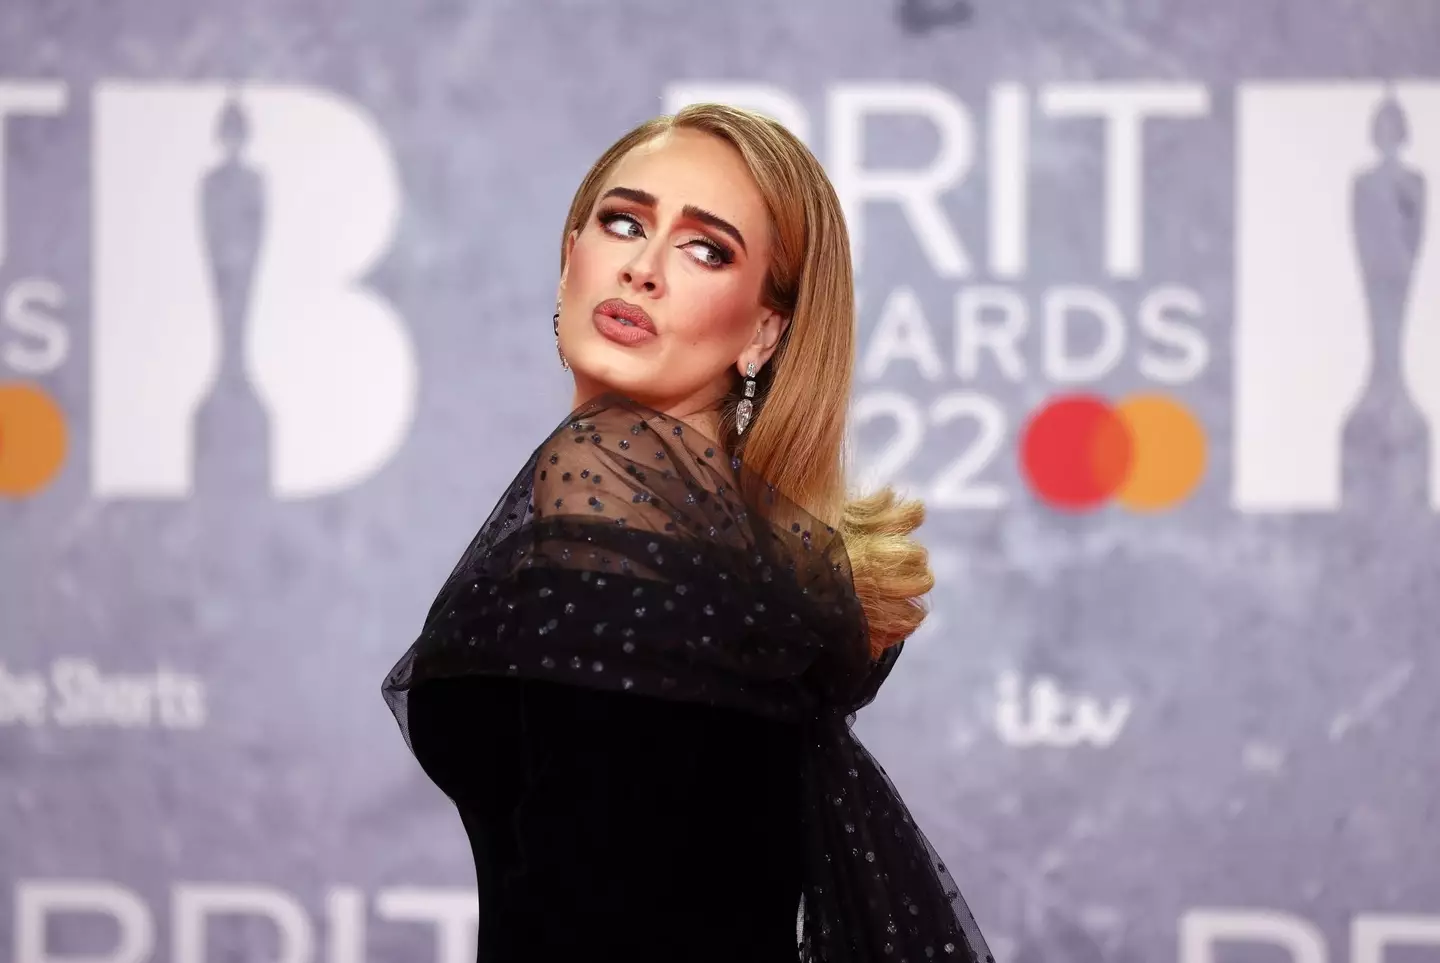 Adele at the 2022 Brit Awards.